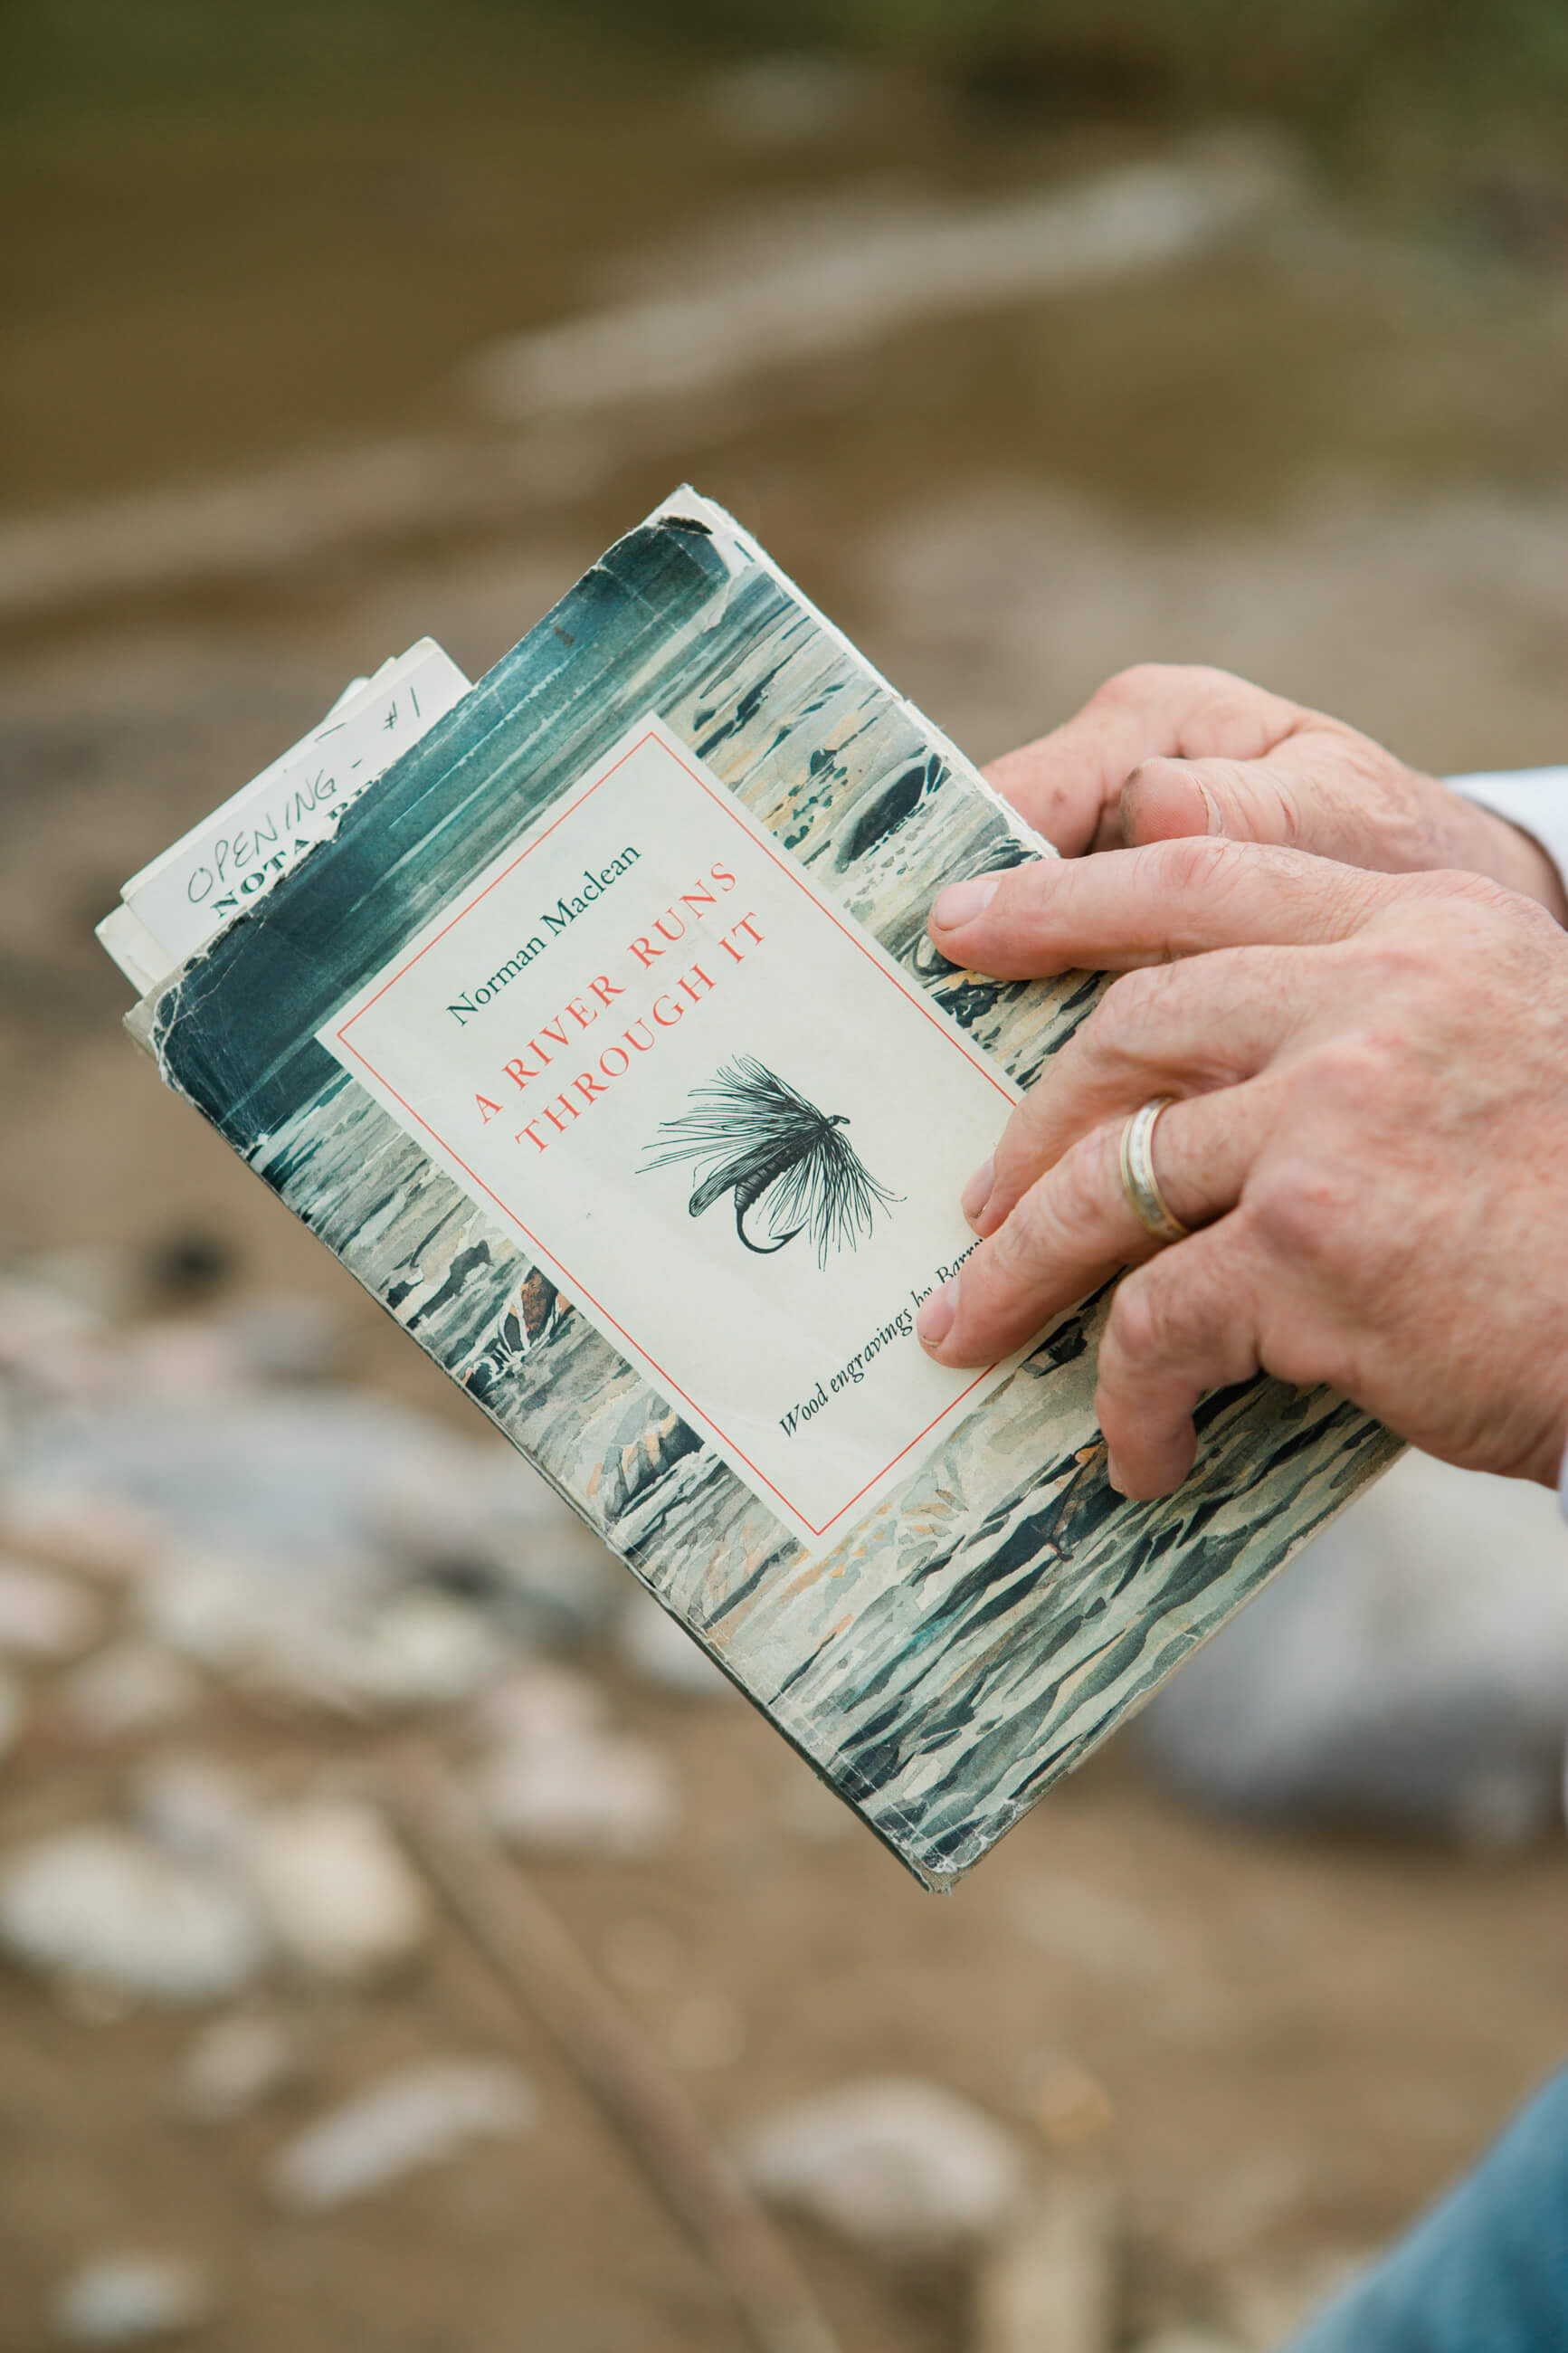 A man holds a worn copy of Norman Maclean's A River Runs Through it with the Blackfoot River in the background